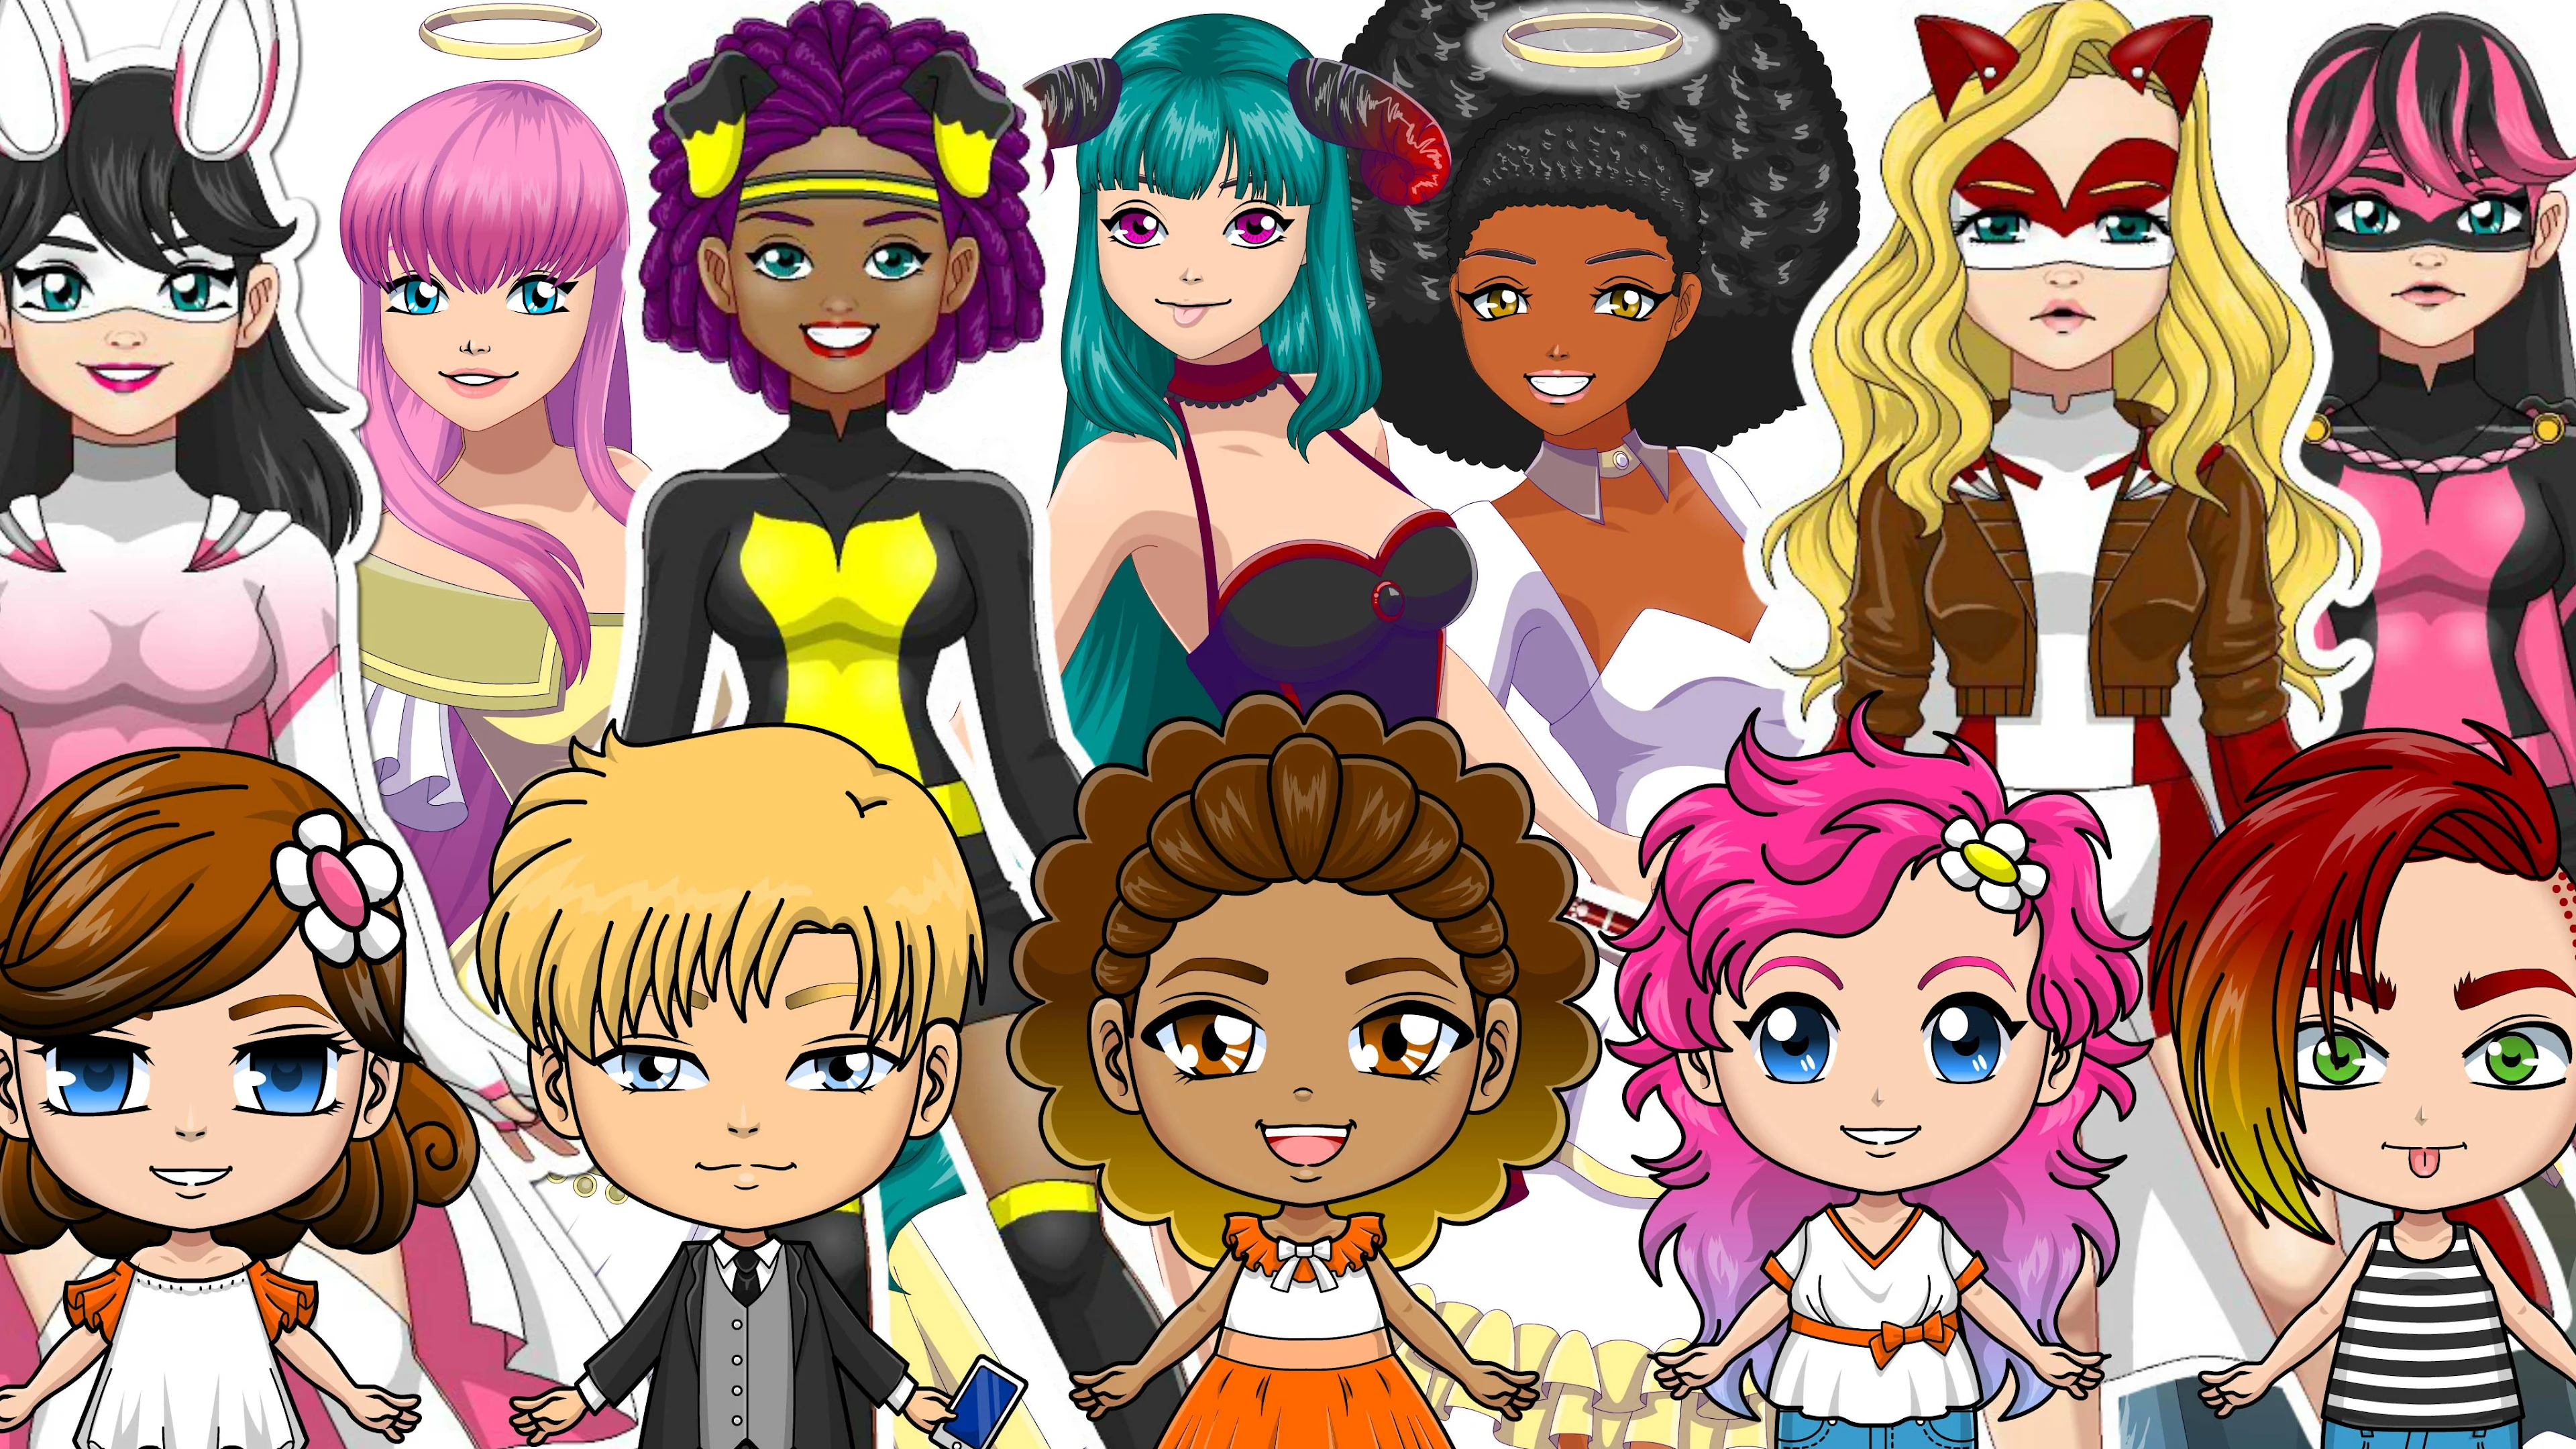 Angel or Demon Avatar Dress Up Game - Online Game - Play for Free